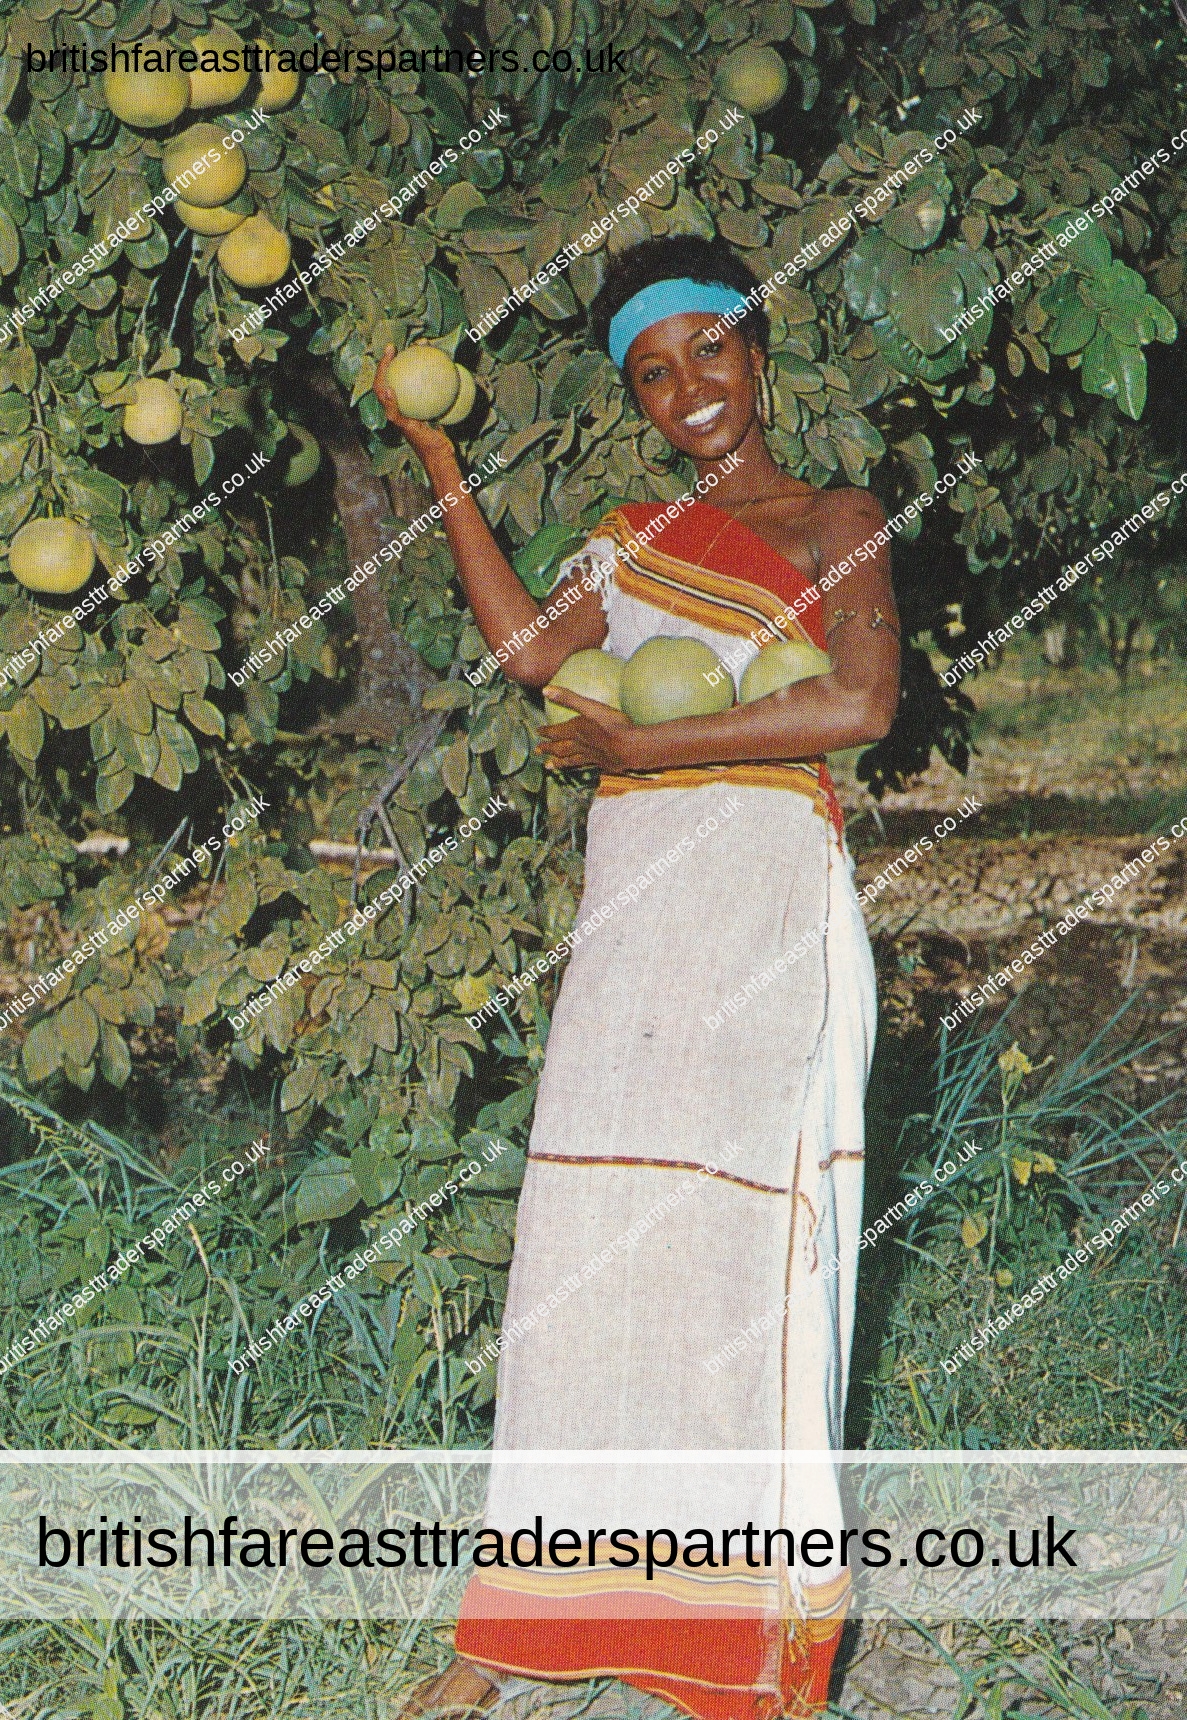 VINTAGE 1950s SOMALIA POSTCARD “SOMALI WOMAN HARVESTING GRAPEFRUIT” SOMALI NATIVE WOMAN | FASHION VINTAGE | COLLECTABLES |  HERITAGE | CULTURES & ETHNICITIES |  SOCIAL HISTORY | ETHNOGRAPHIC STUDIES | RESEARCH | SOMALIA | AFRICA